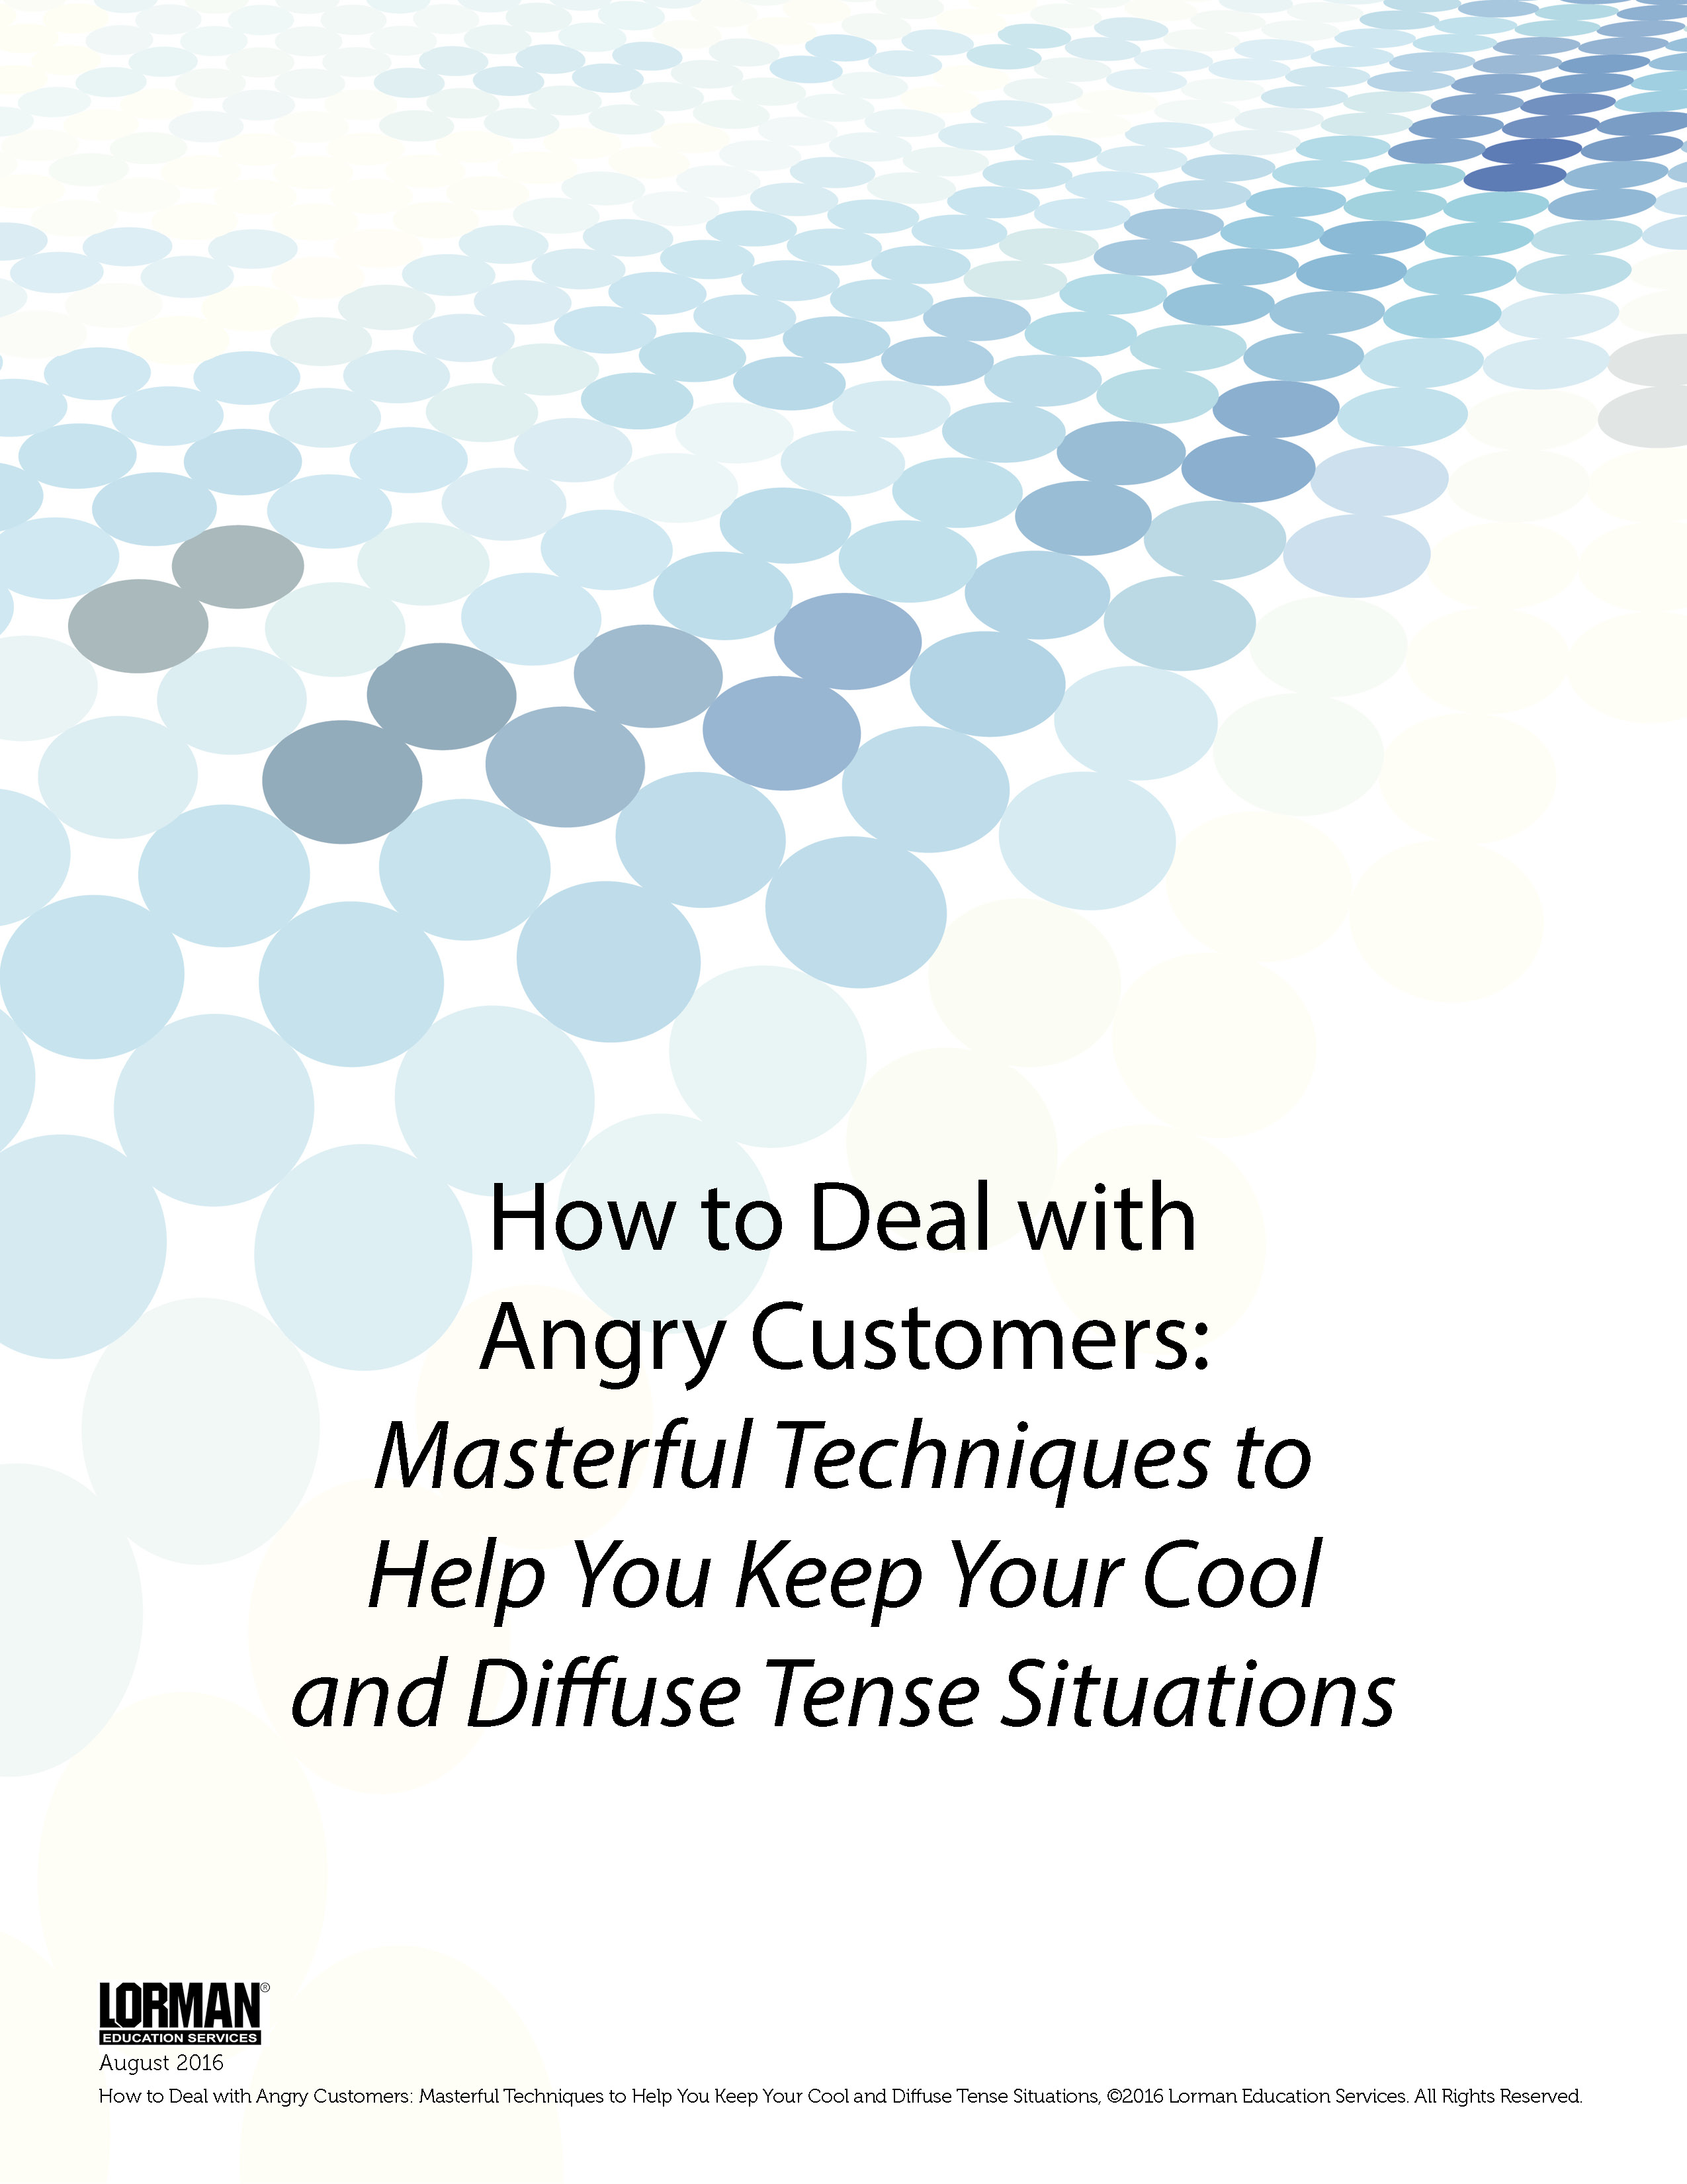 Dealing with Angry Customers: Techniques to Help You Keep Your Cool and Diffuse Tense Situations